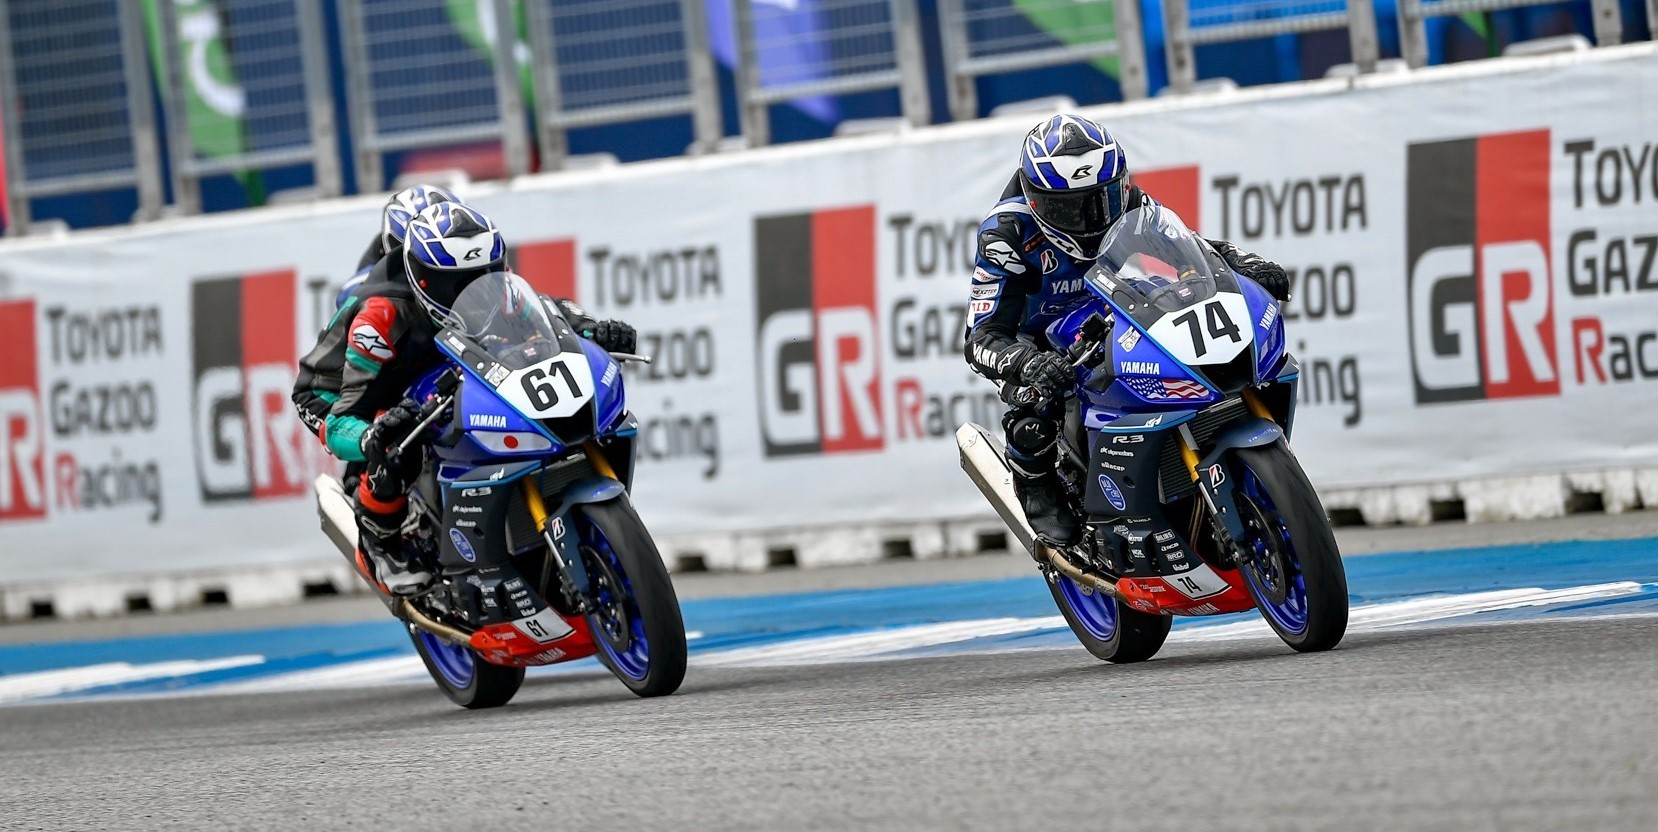 American Kensei Matsudaira Makes Racing Debut in Thailand with Top 5 Finish